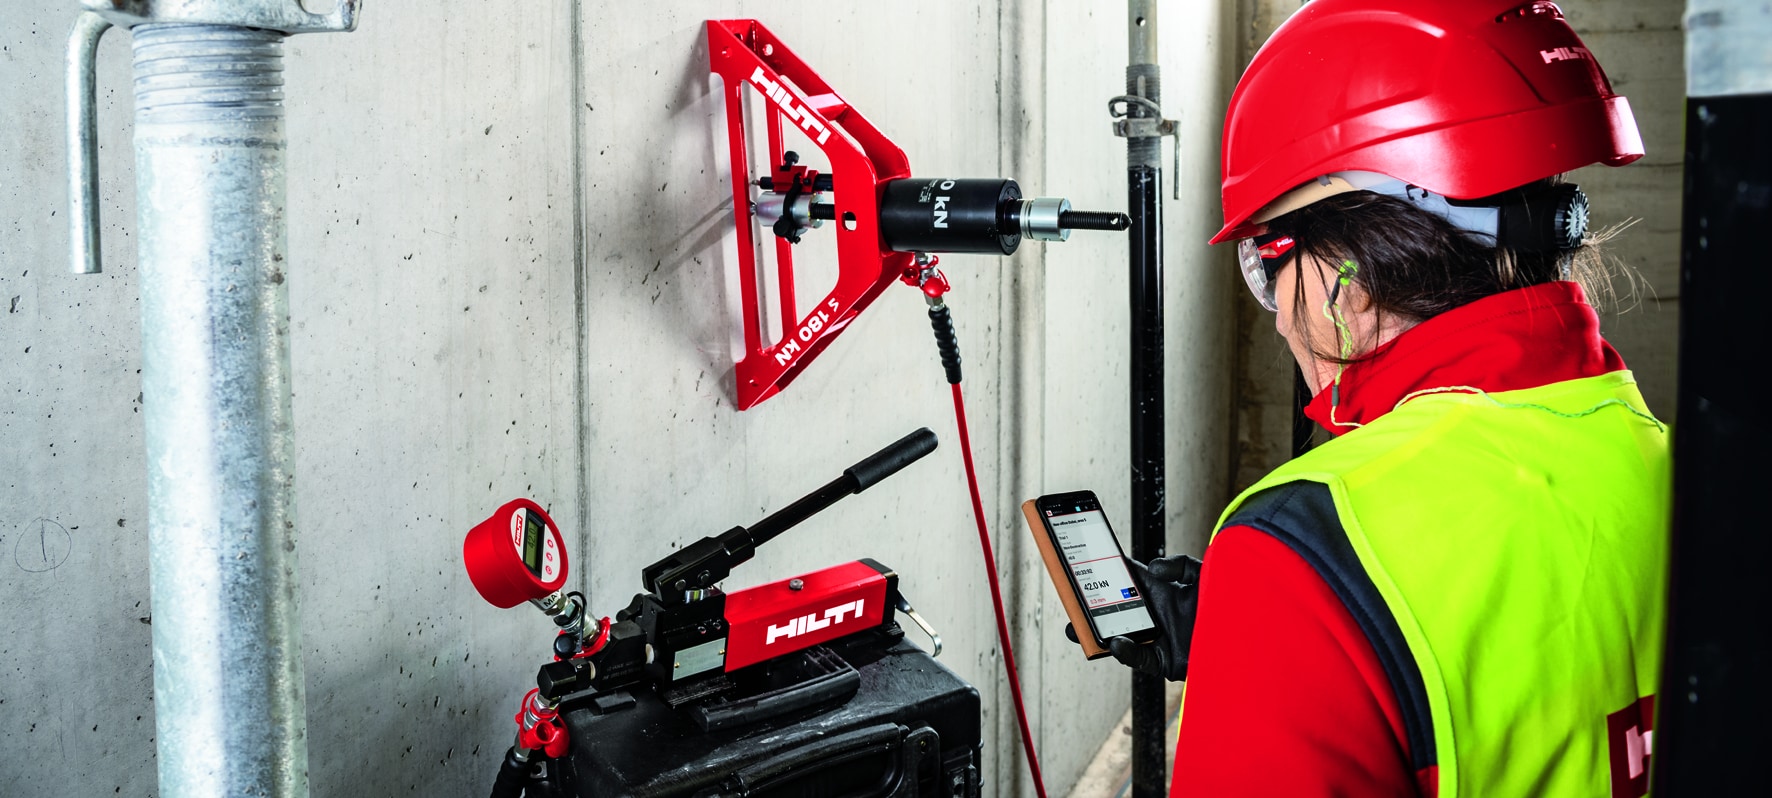 Tensile test apparatus for Hilti on-site concrete anchor testing service